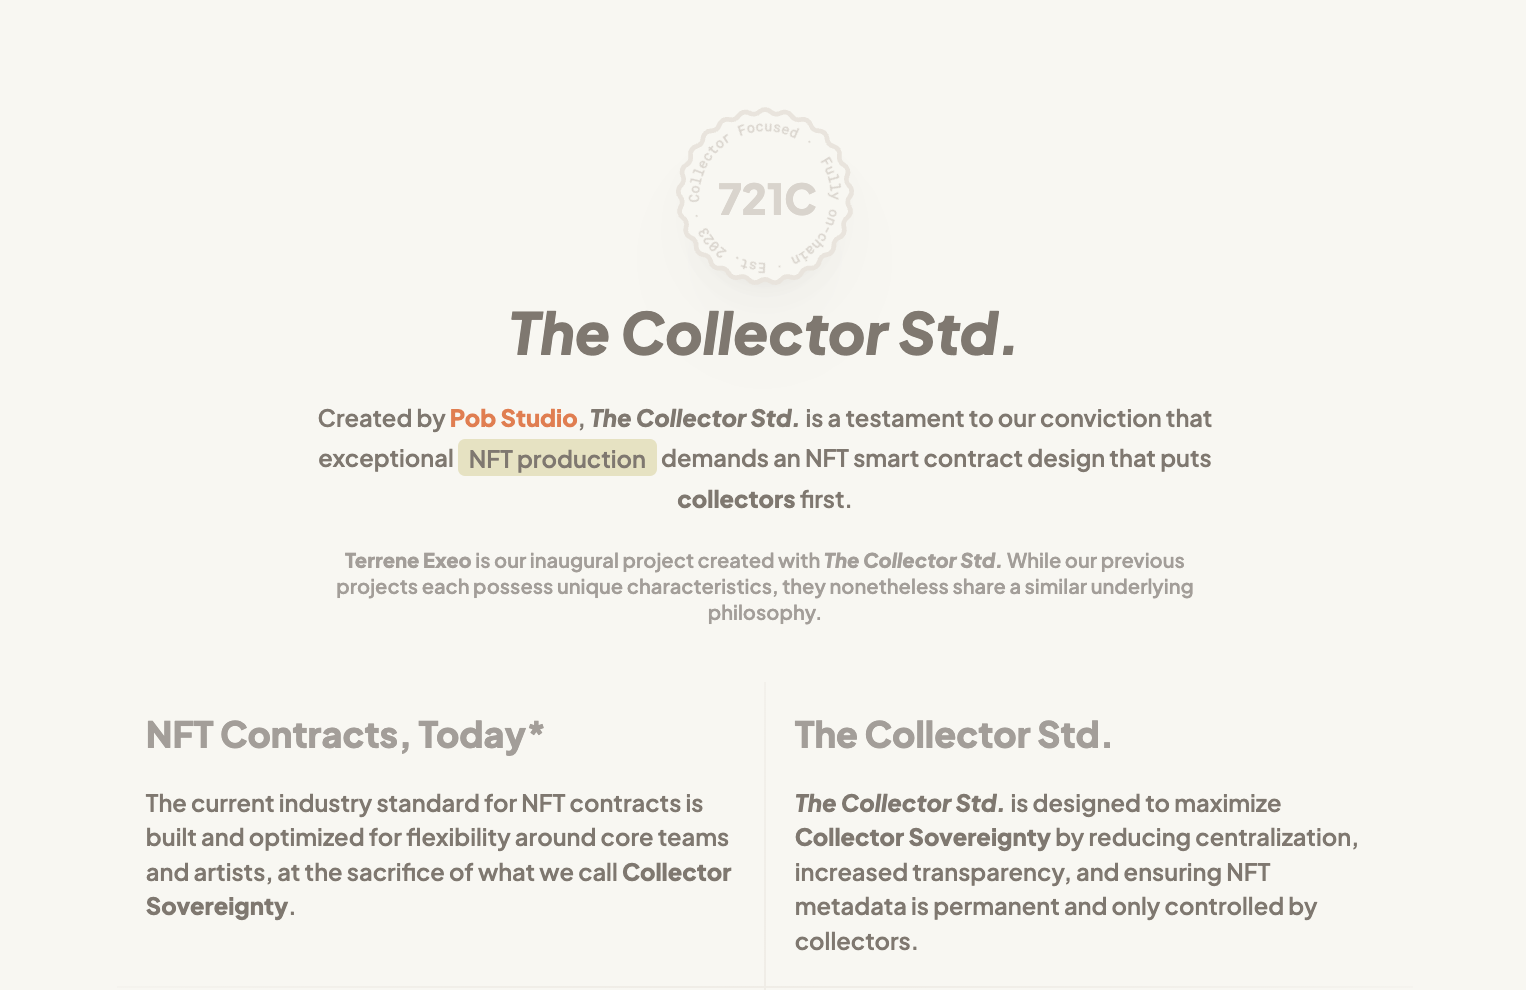 The Collector Std. is our answer to creating NFTs that collectors deserve